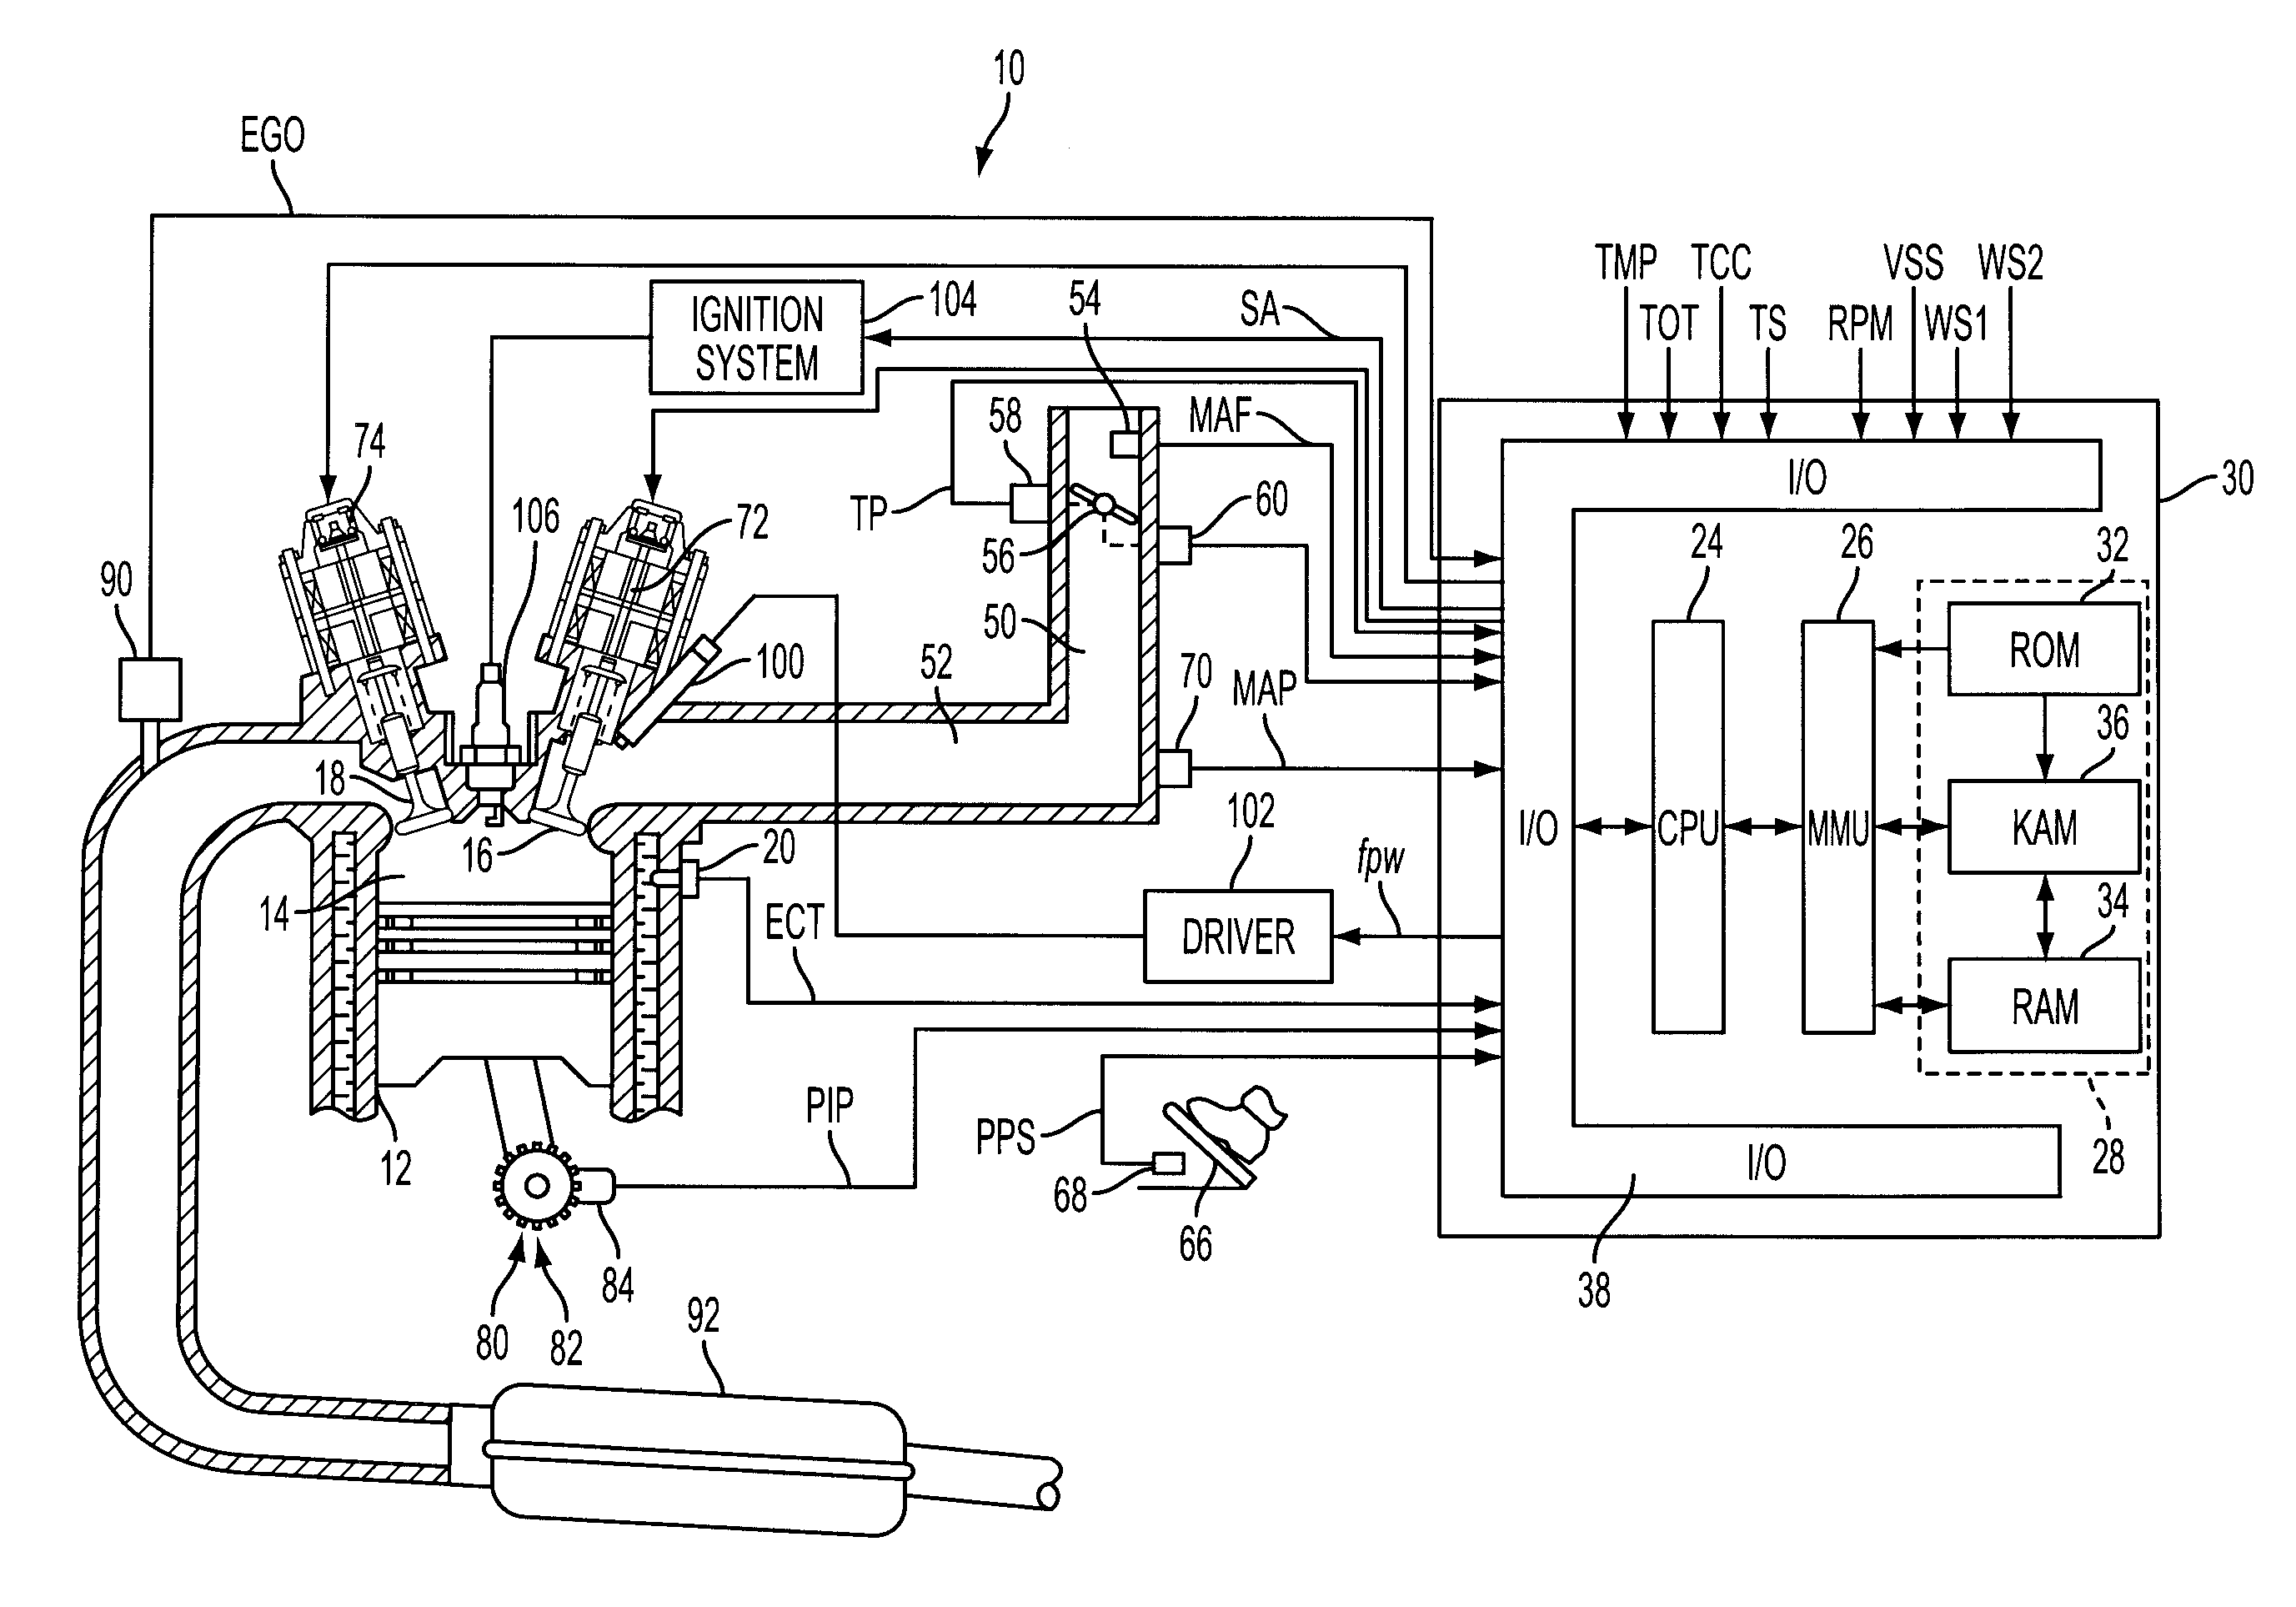 Induction air acoustics management for internal combustion engine